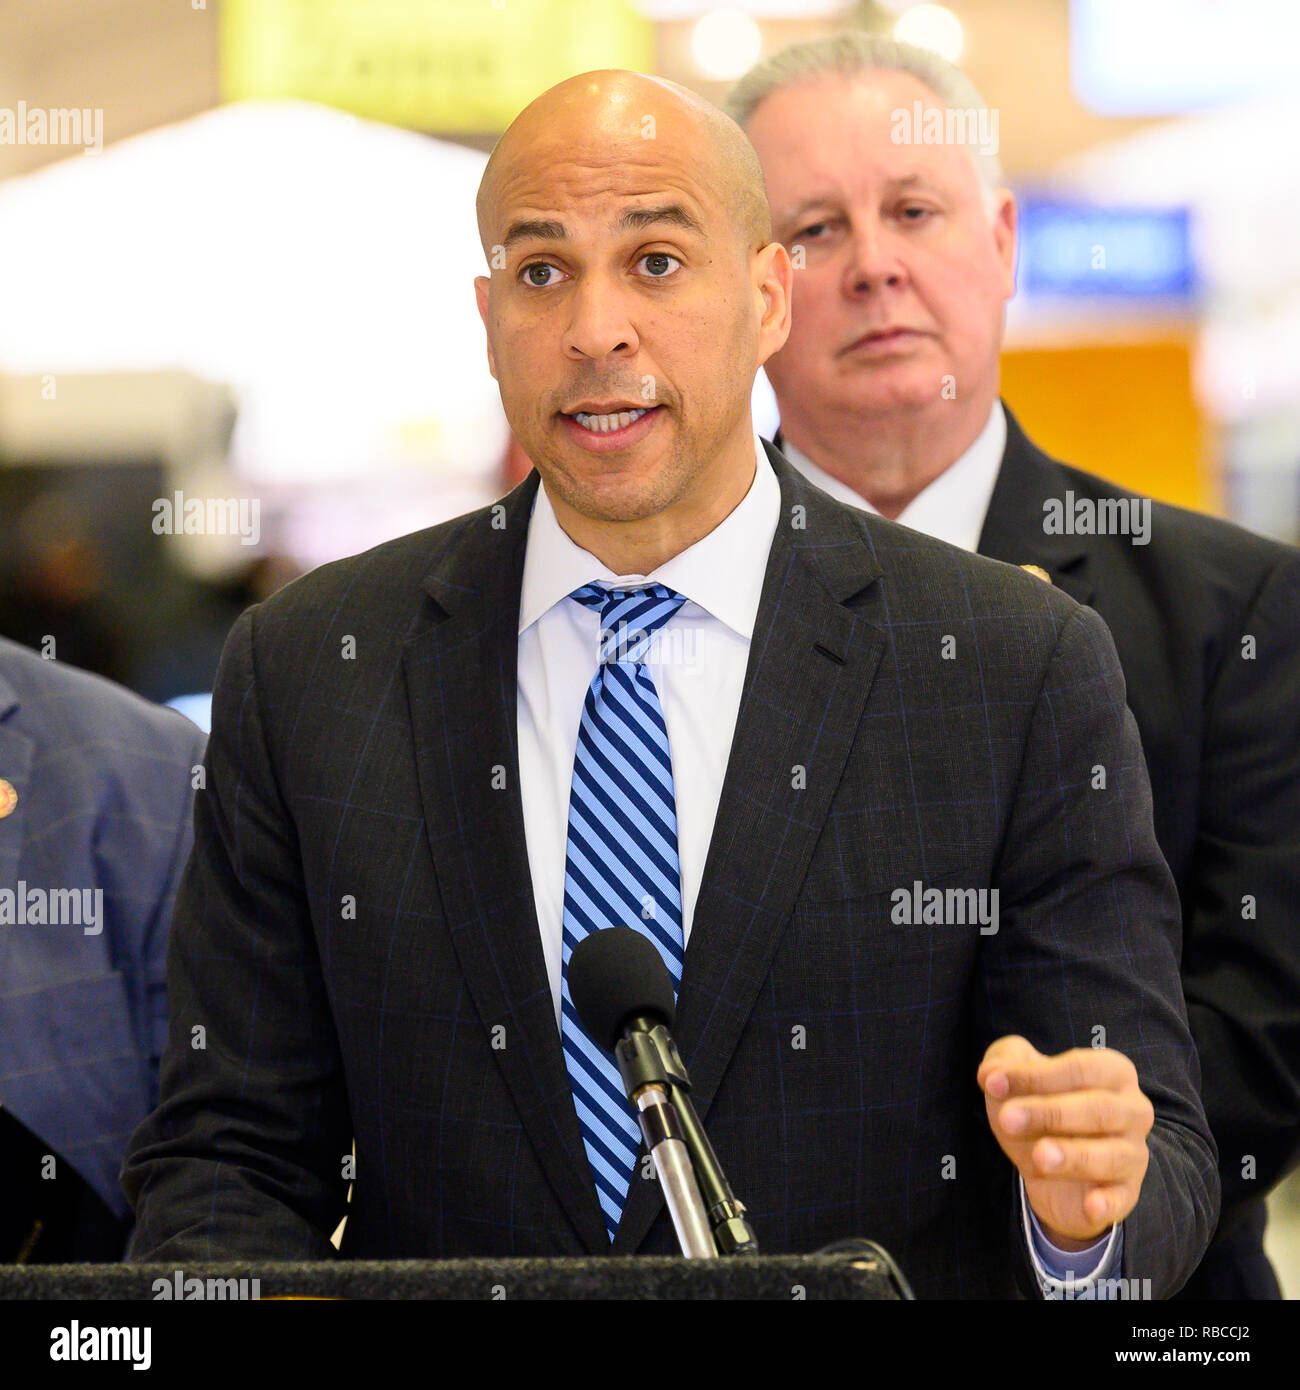 U.S. Senator Cory Booker (D-NJ) seen speaking at a news conference at Newark Liberty International Airport to demand an end to the partial government shutdown leaving thousands of federal workers in New Jersey without pay and to highlight the impacts of lost services being felt statewide. At Newark Liberty International Airport in Newark, New Jersey. Stock Photo